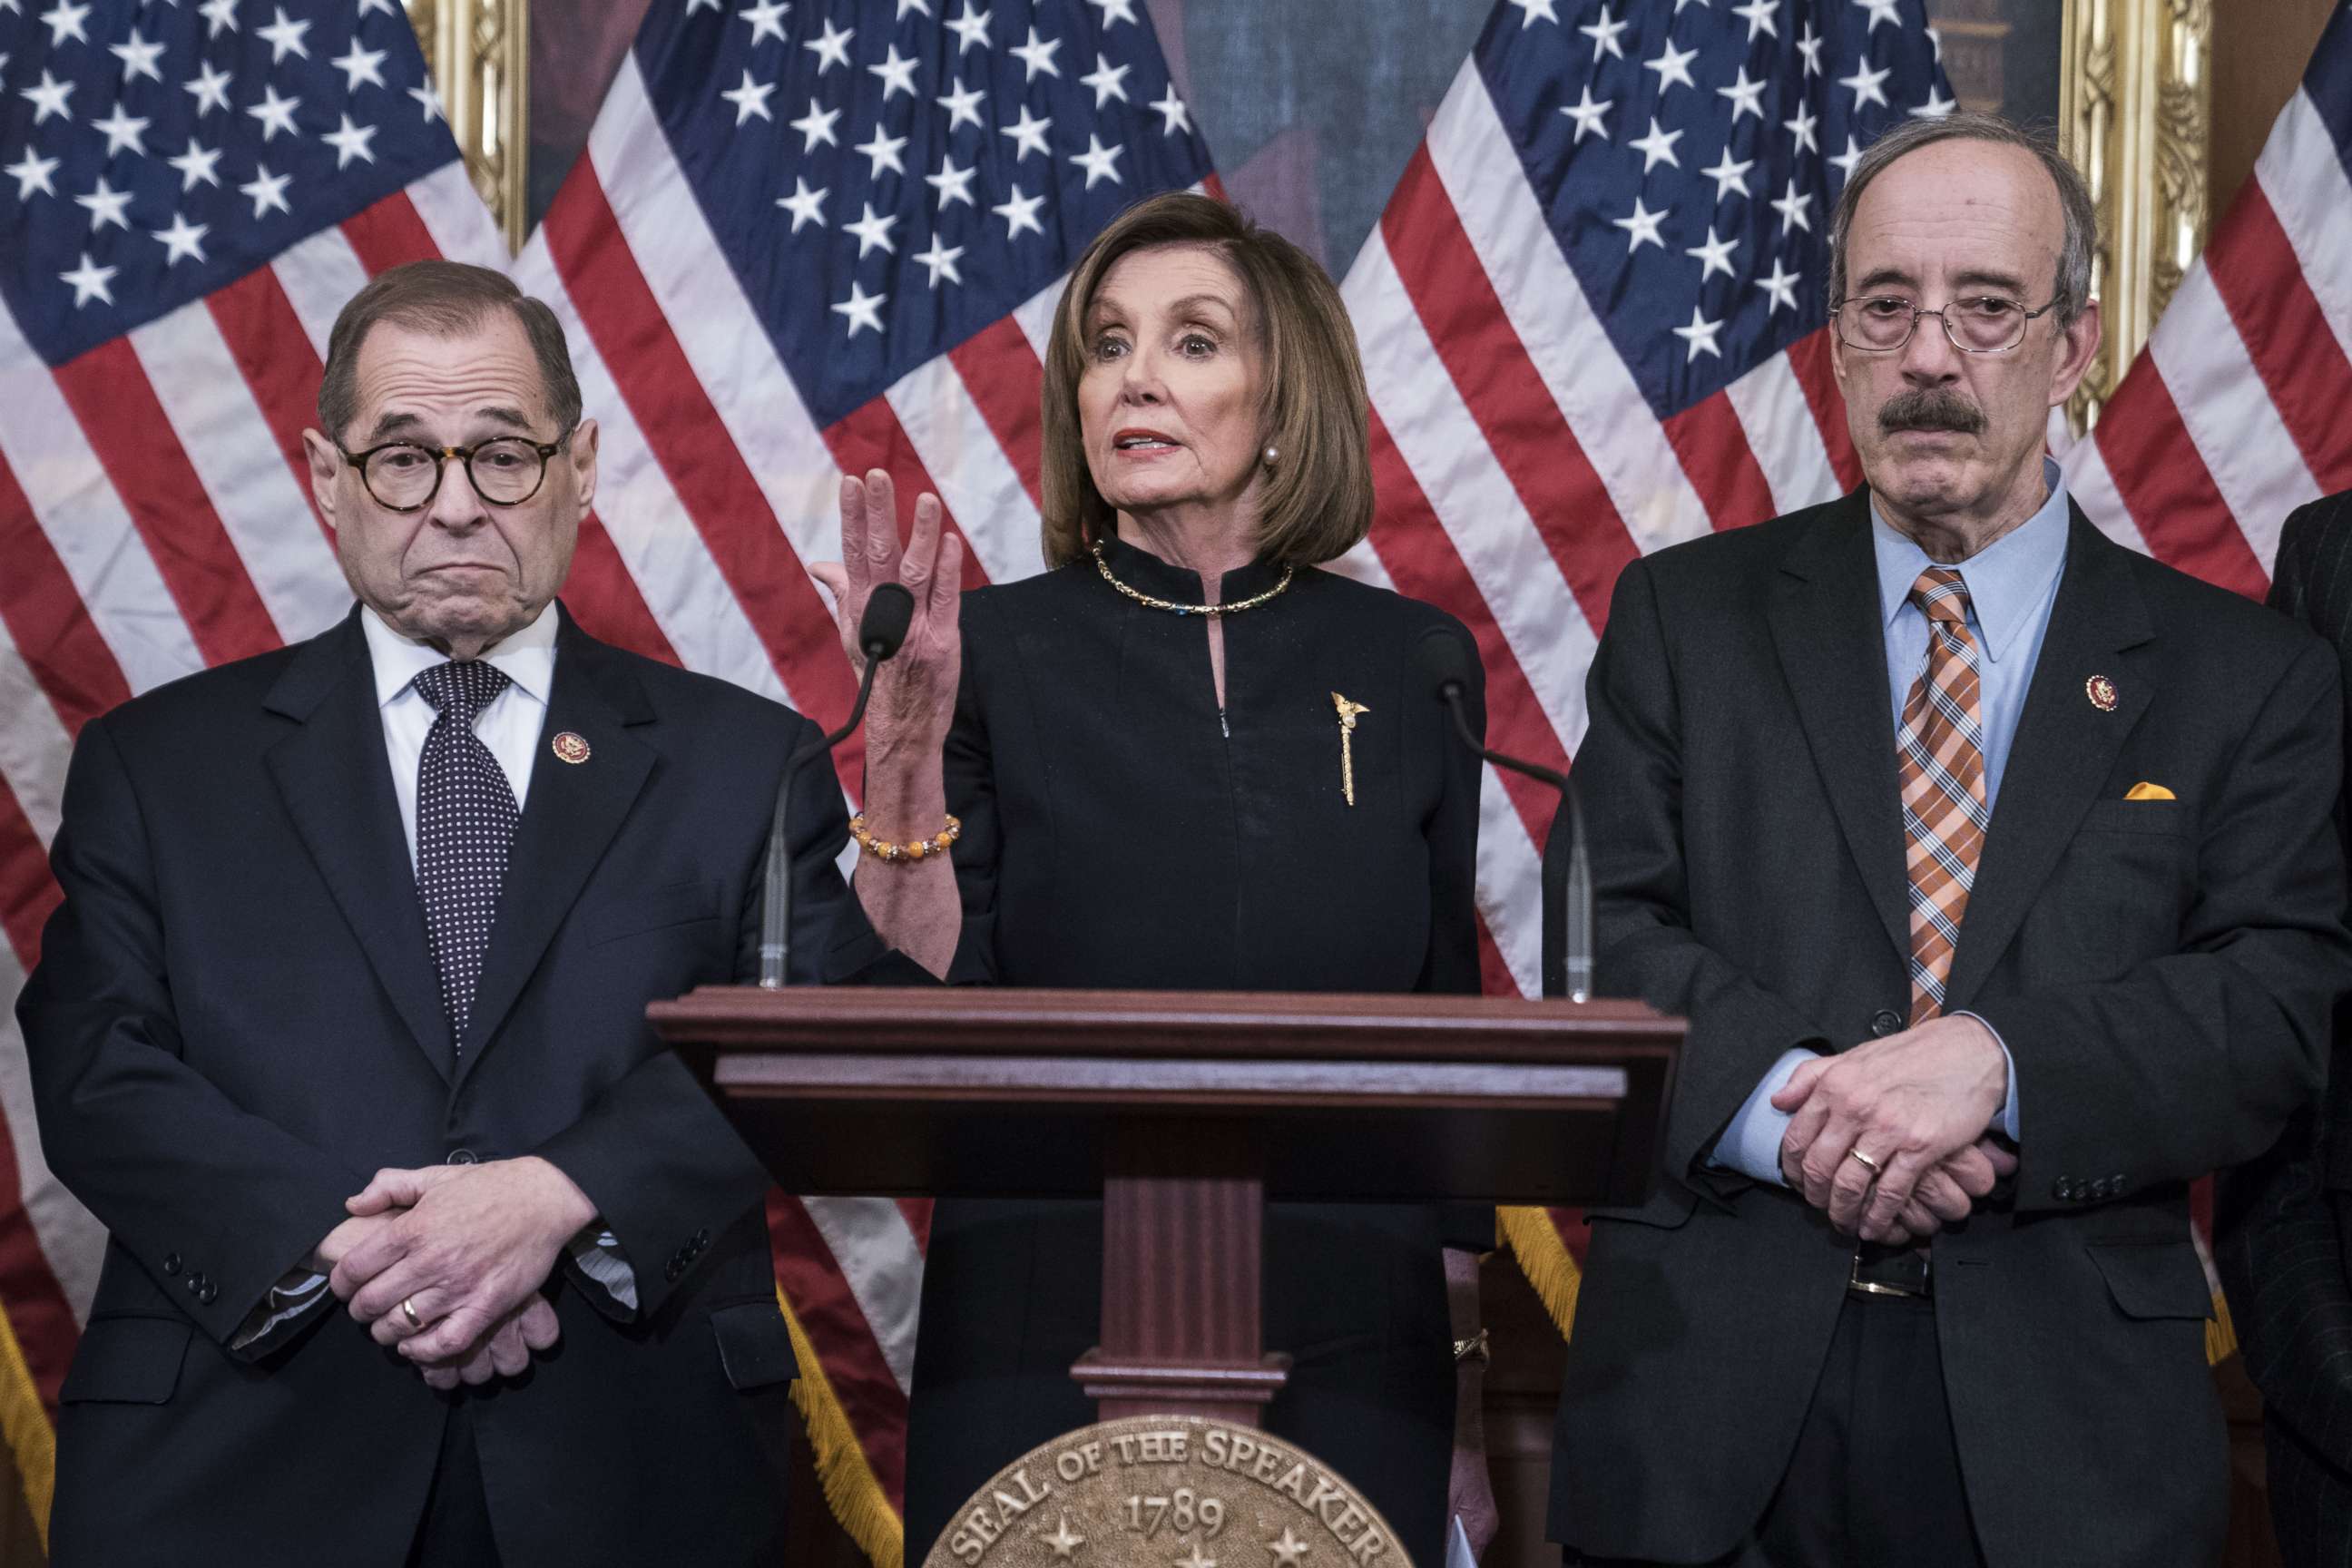 PHOTO: Speaker of the House Nancy Pelosi delivers remarks alongside Jerry Nadler, D-N.Y., and Eliot Engel, D-N.Y., following the House of Representatives vote to impeach President Donald Trump on Dec. 18, 2019 in Washington, D.C.